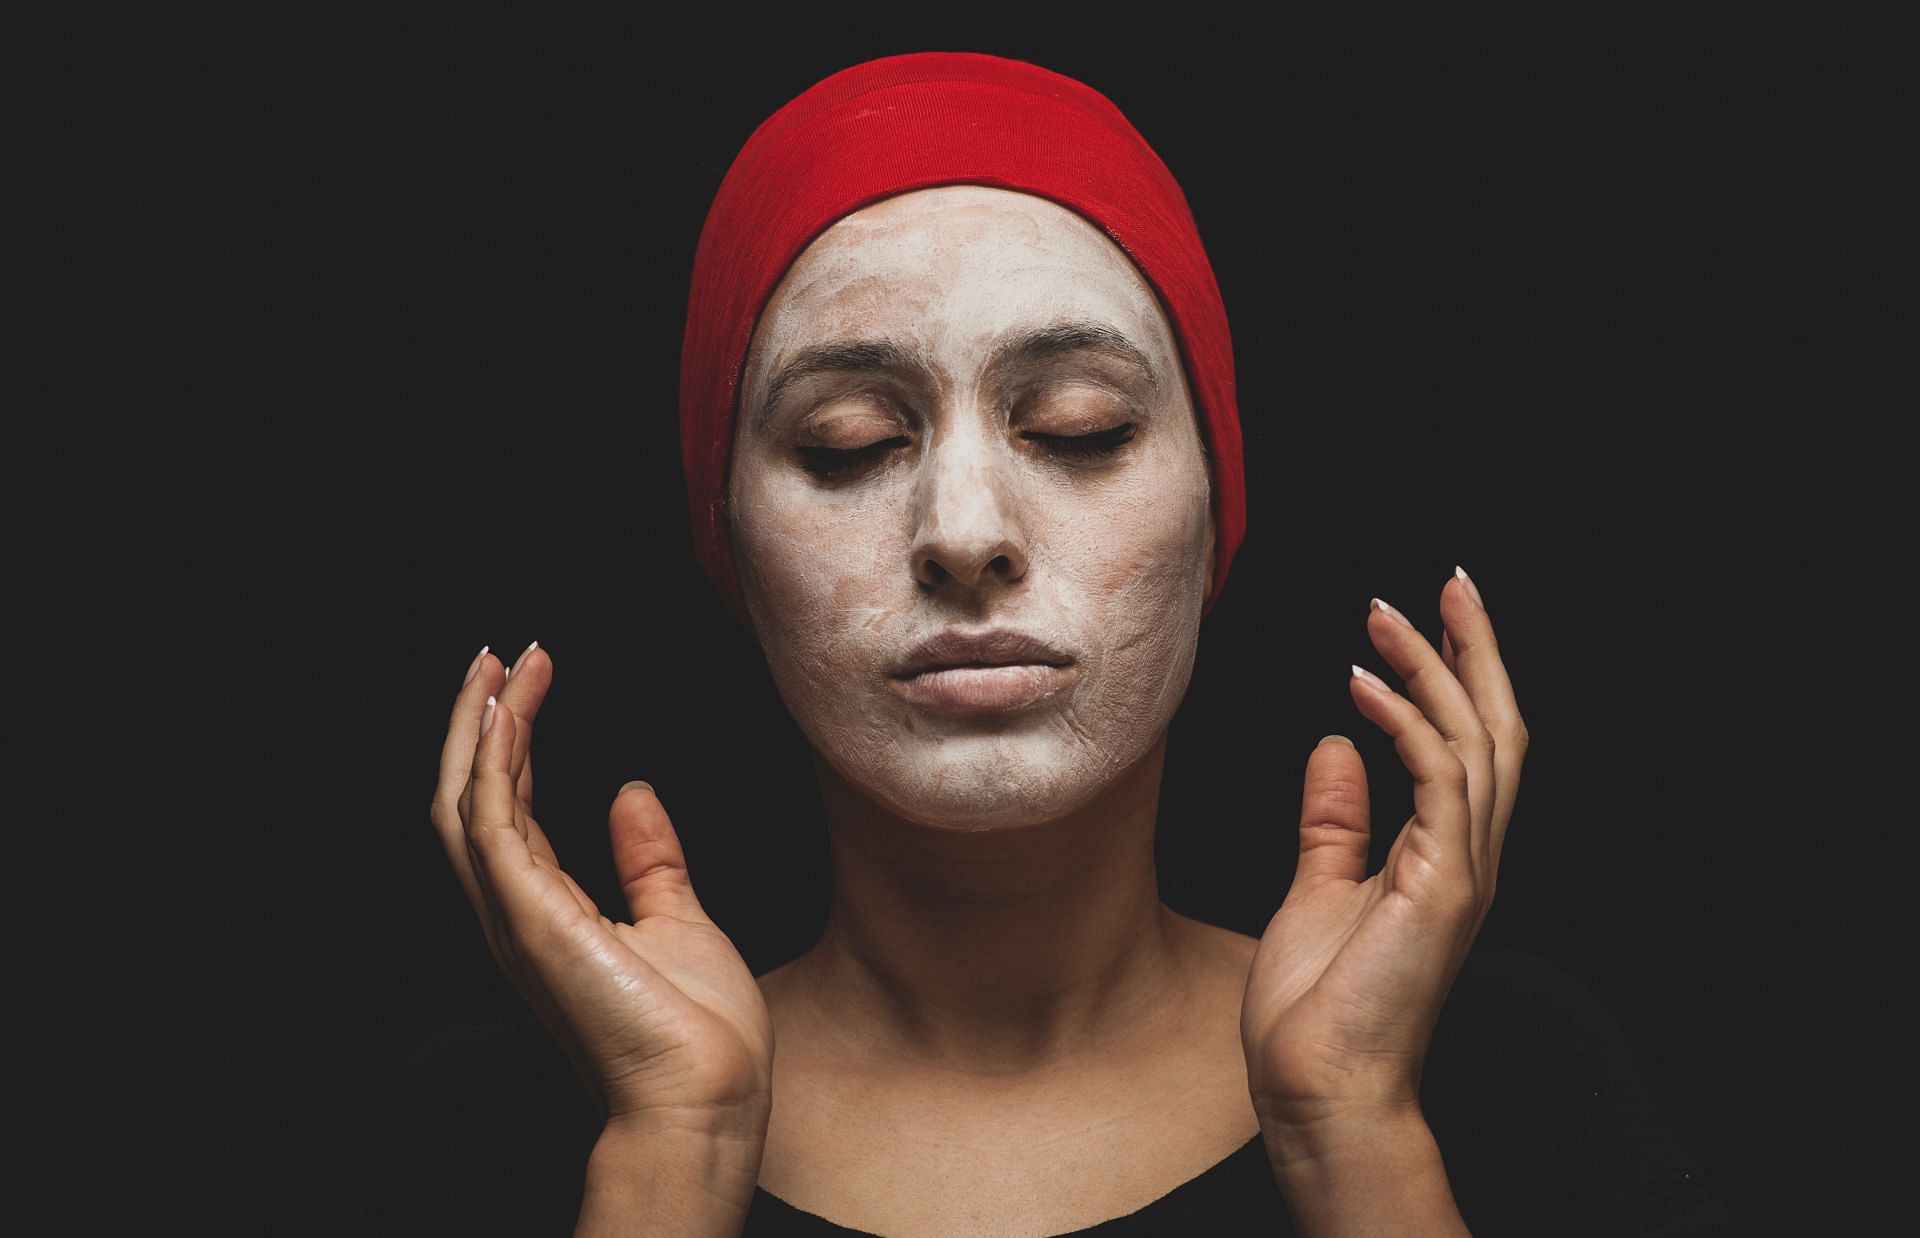 Cleansing Balm is used to move makeups easily(Image by Engin Akyurt/Unsplash)